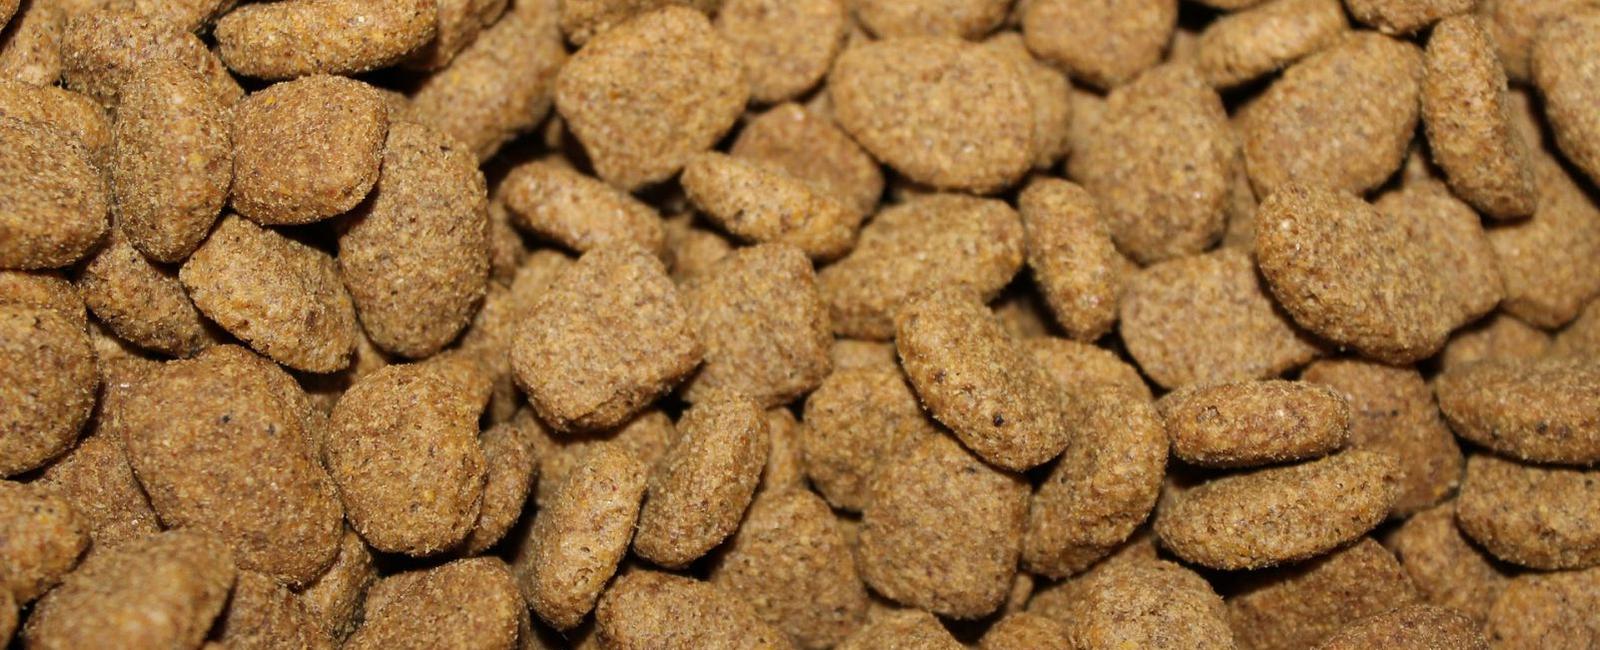 How Many Cups Are in a Pound of Dog Food?